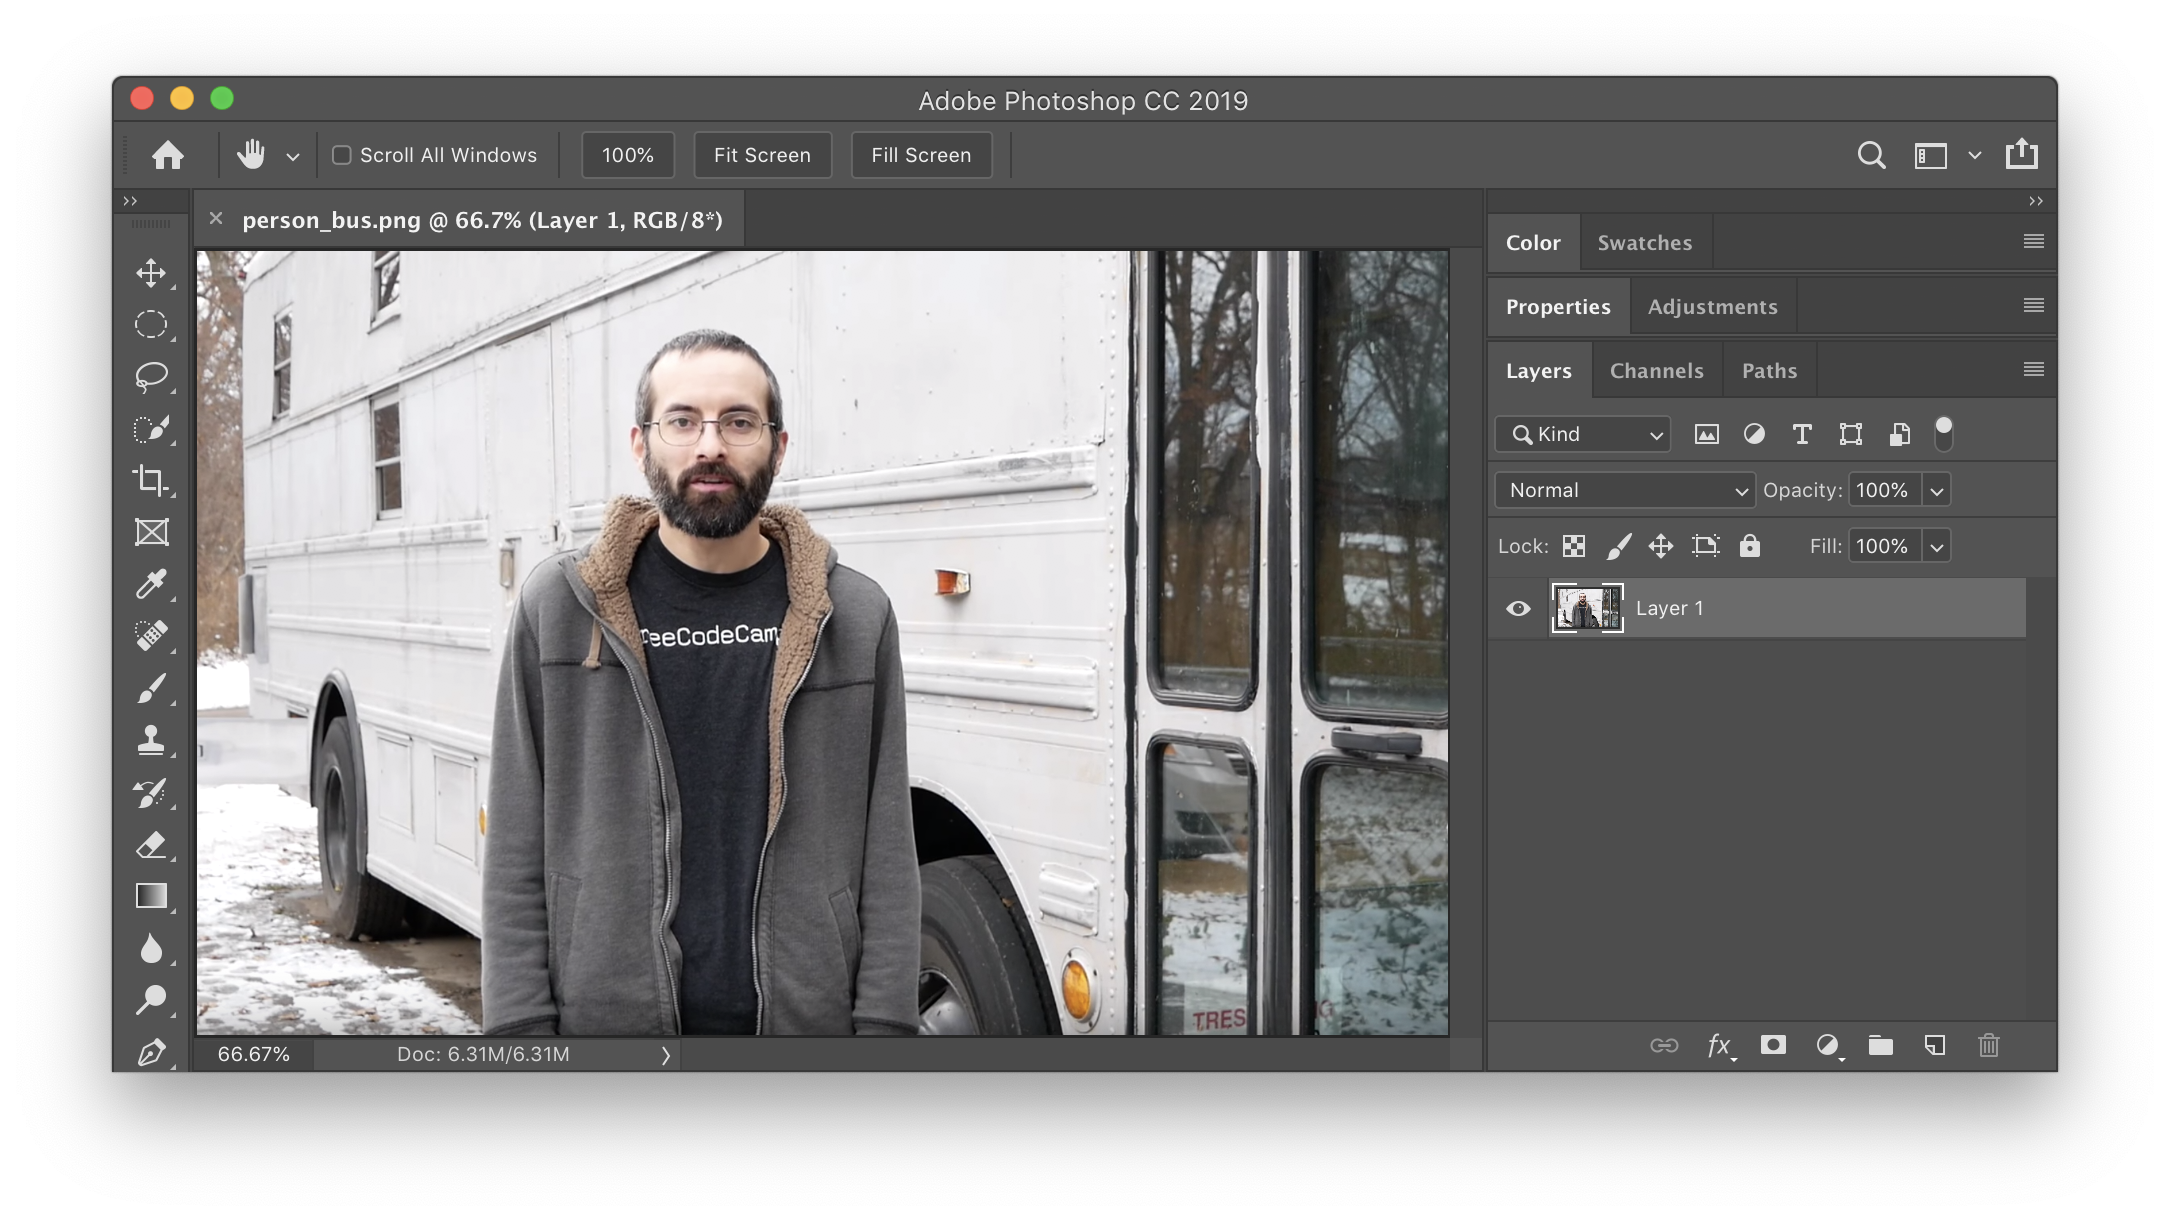 How to Blur a Picture in Photoshop - Blur Faces, Backgrounds, and More